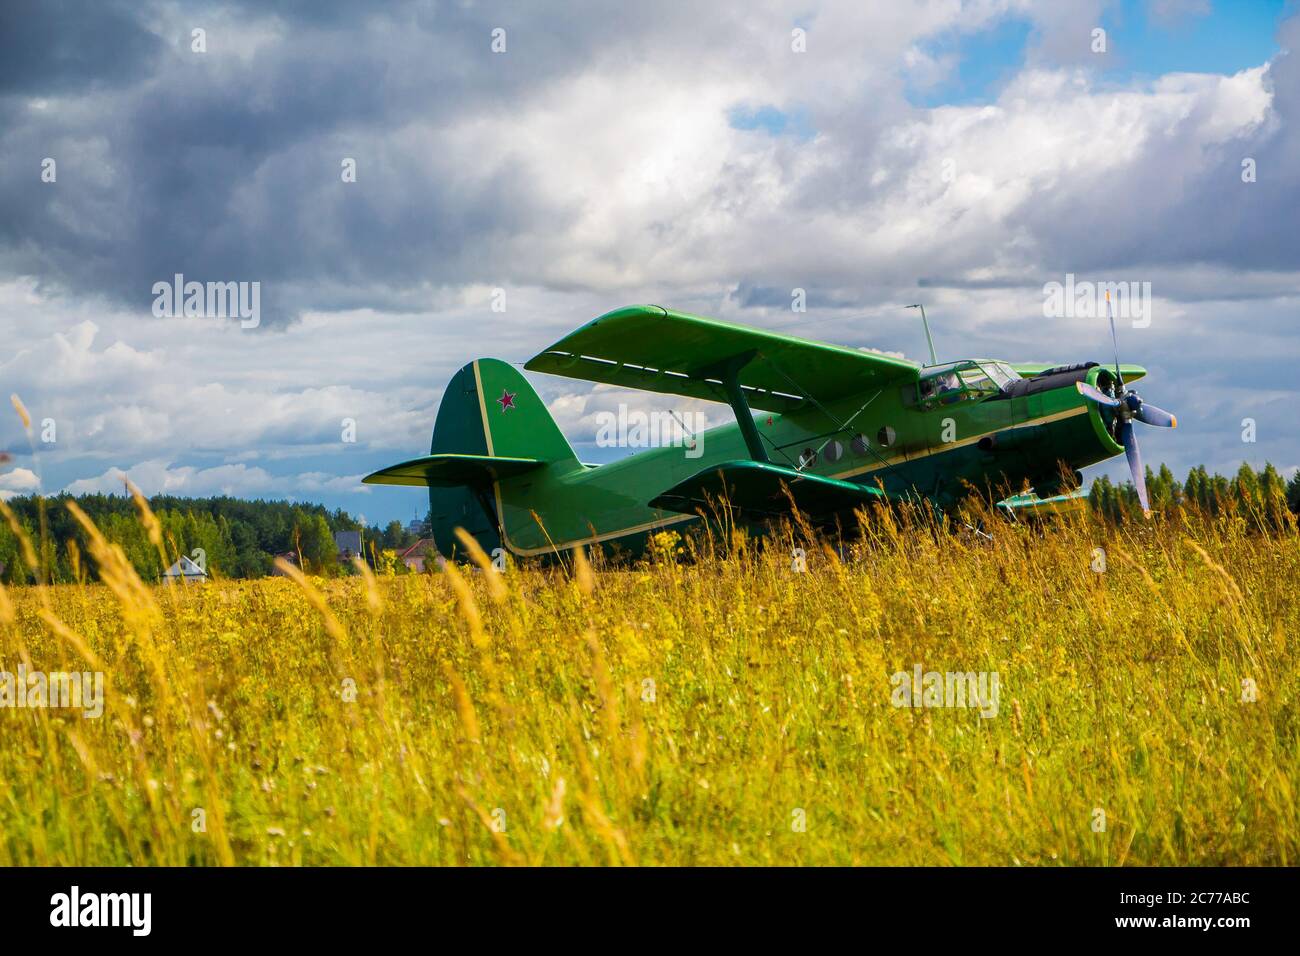 Vintage aircraft preparing for take-off on the background of a stormy sky Stock Photo